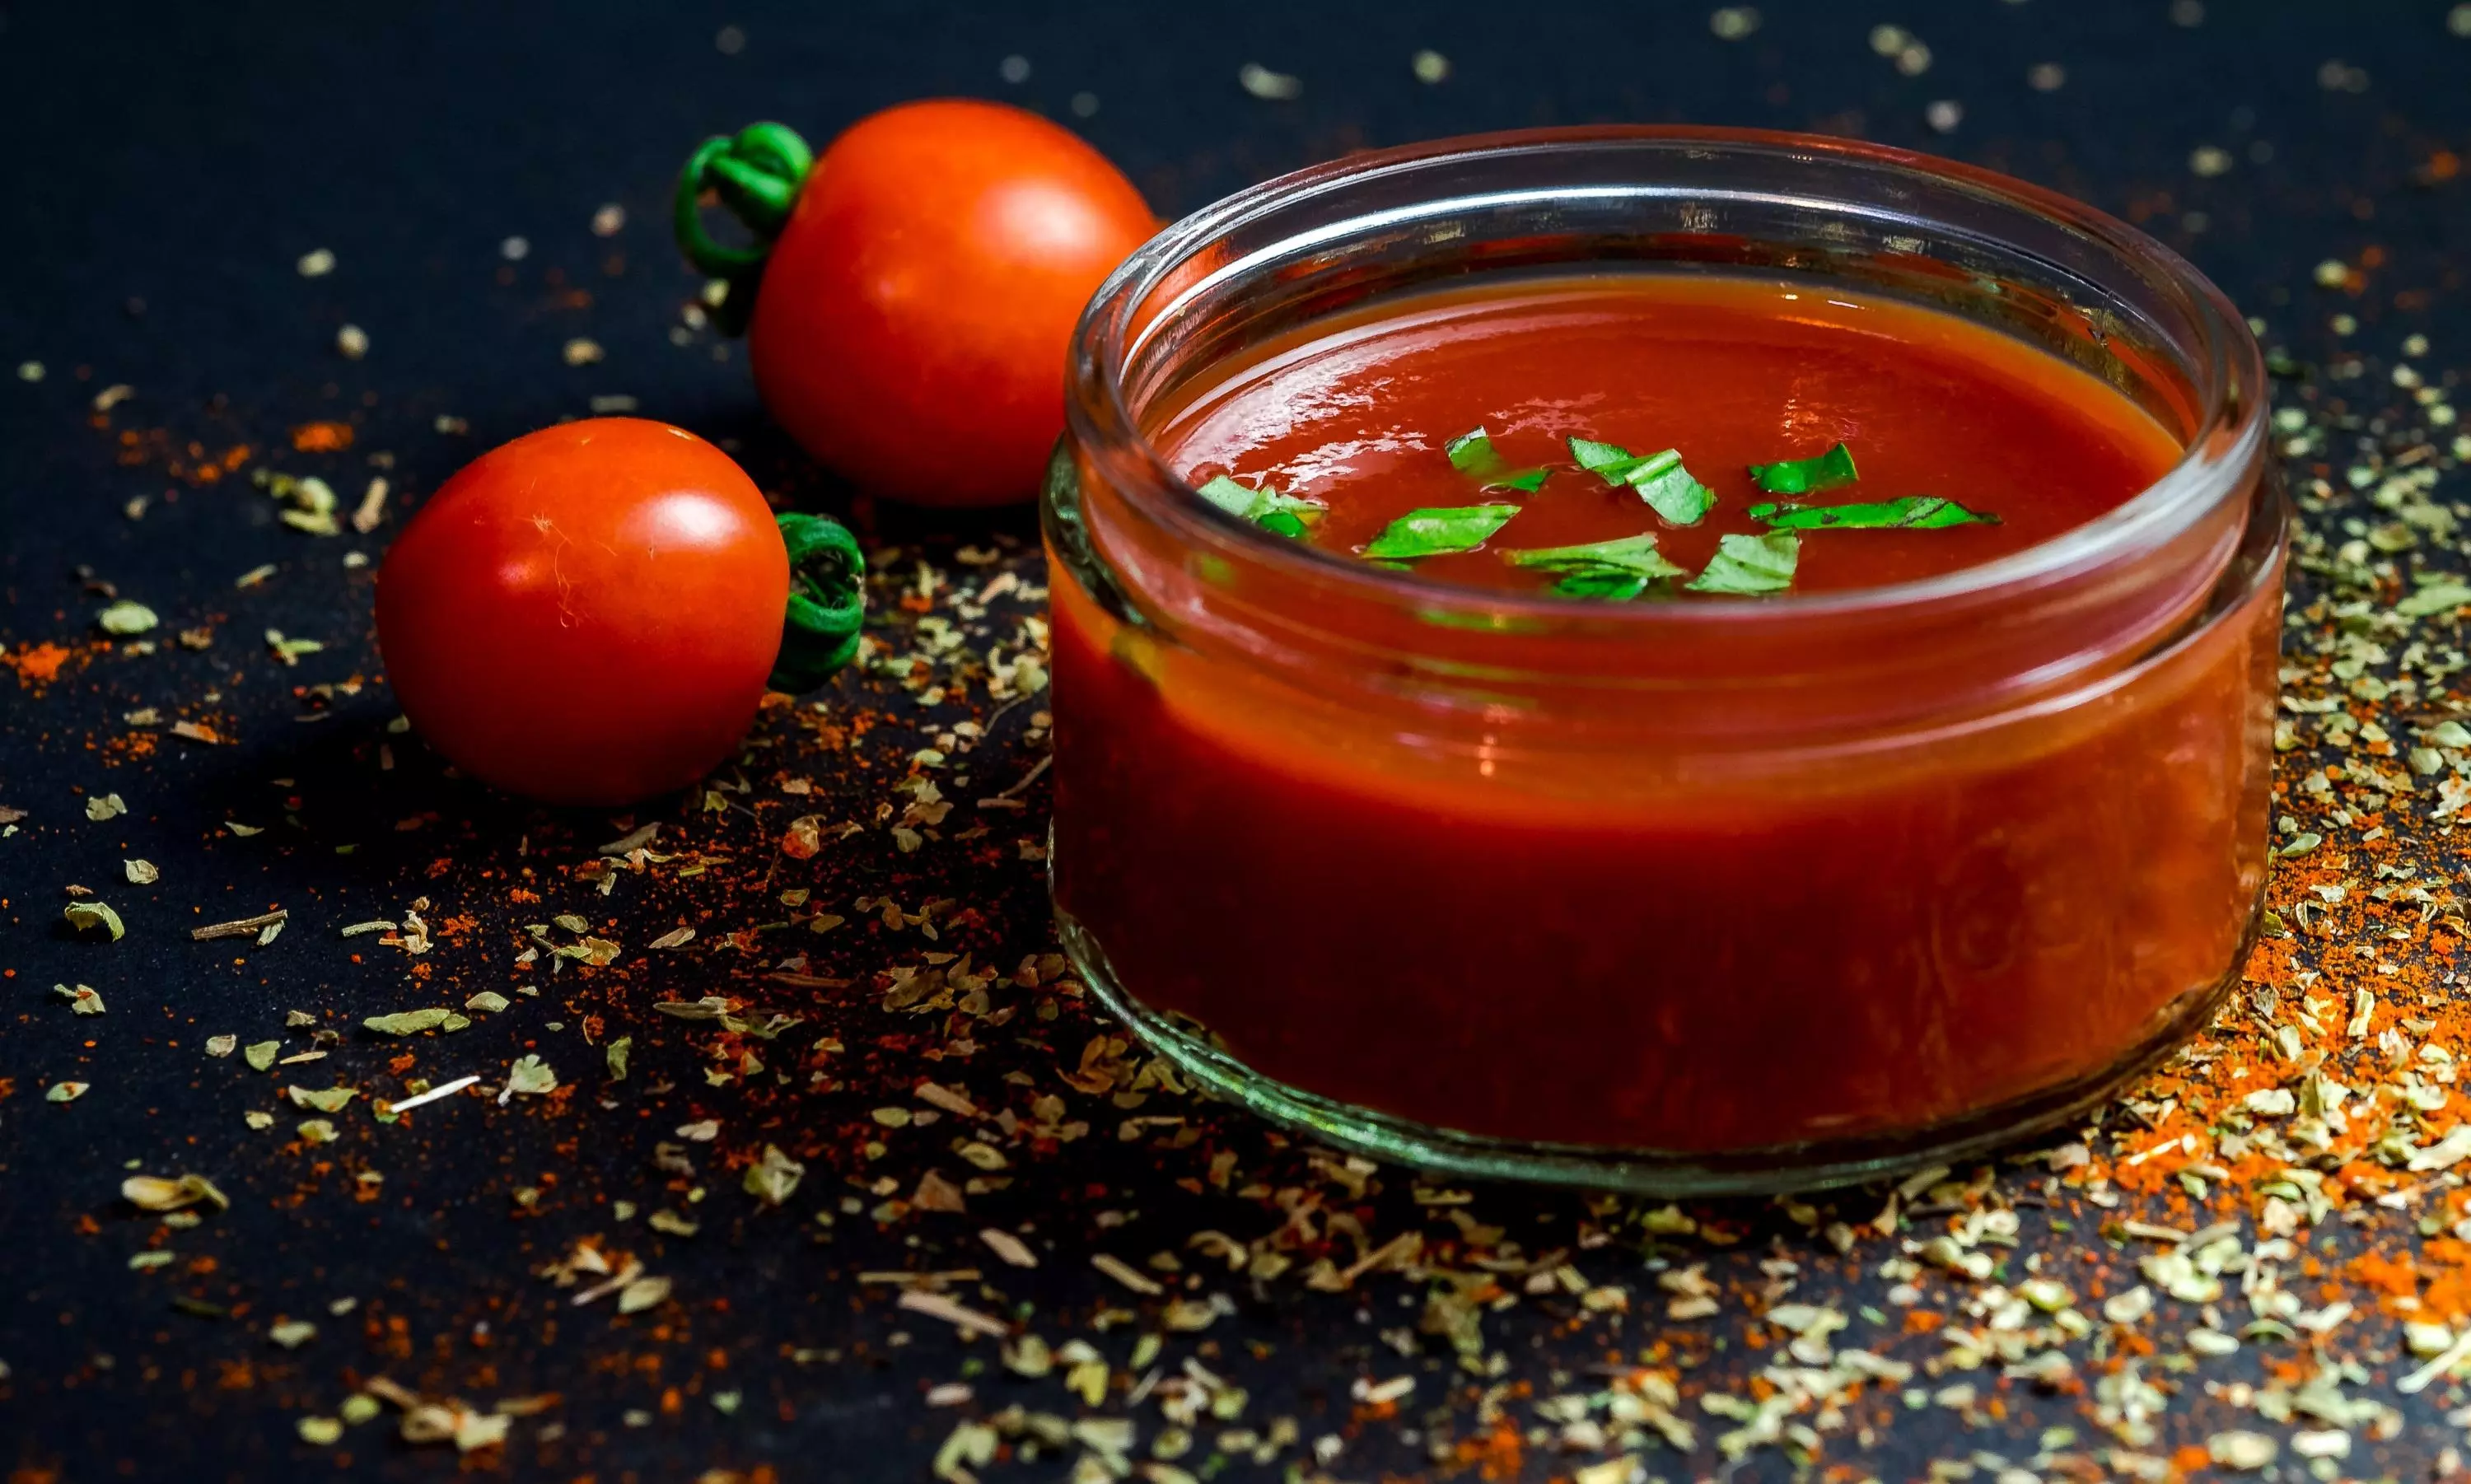 From hot sauces to lip-smacking chutneys, it seems that condiments are here to roux-le your kitchen